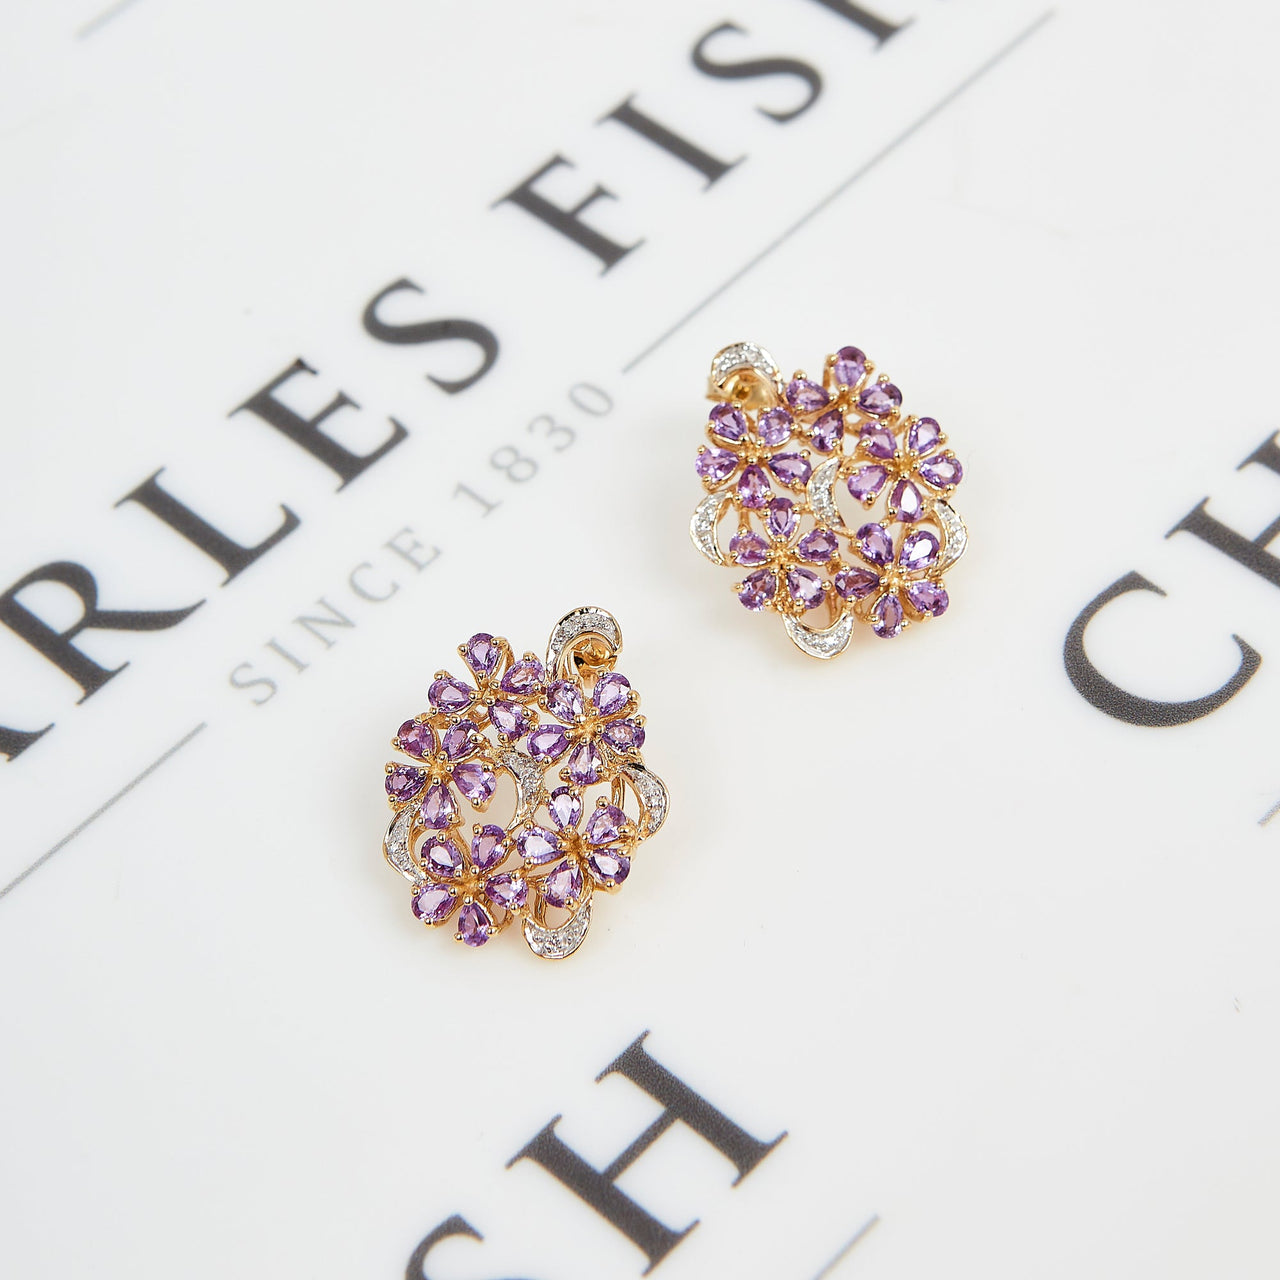 Pre-Owned 9ct Gold Pink Sapphire Diamond Cluster Earrings